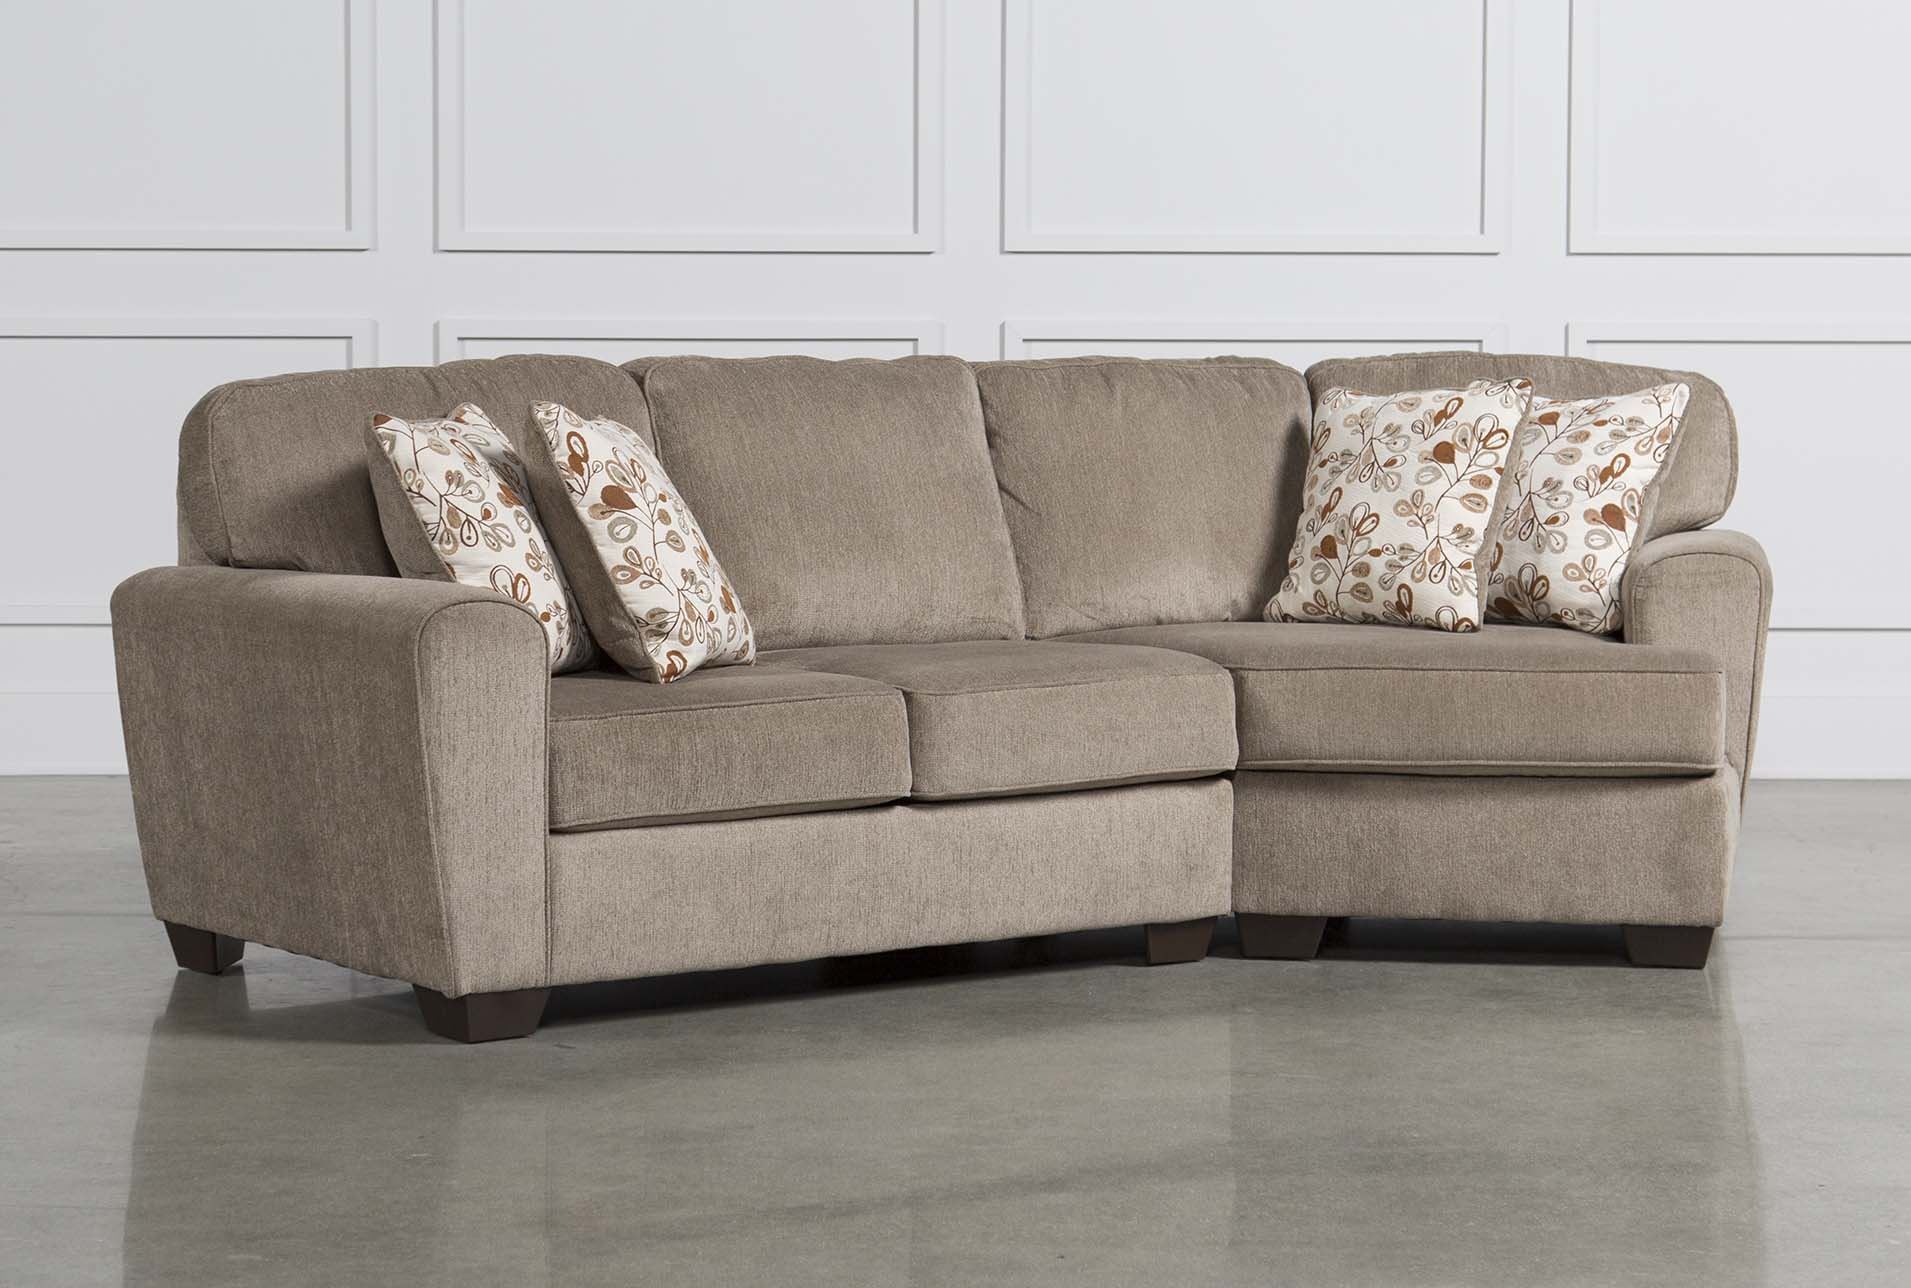 Patola Park 2 Piece Sectional W/Raf Cuddler Chaise 